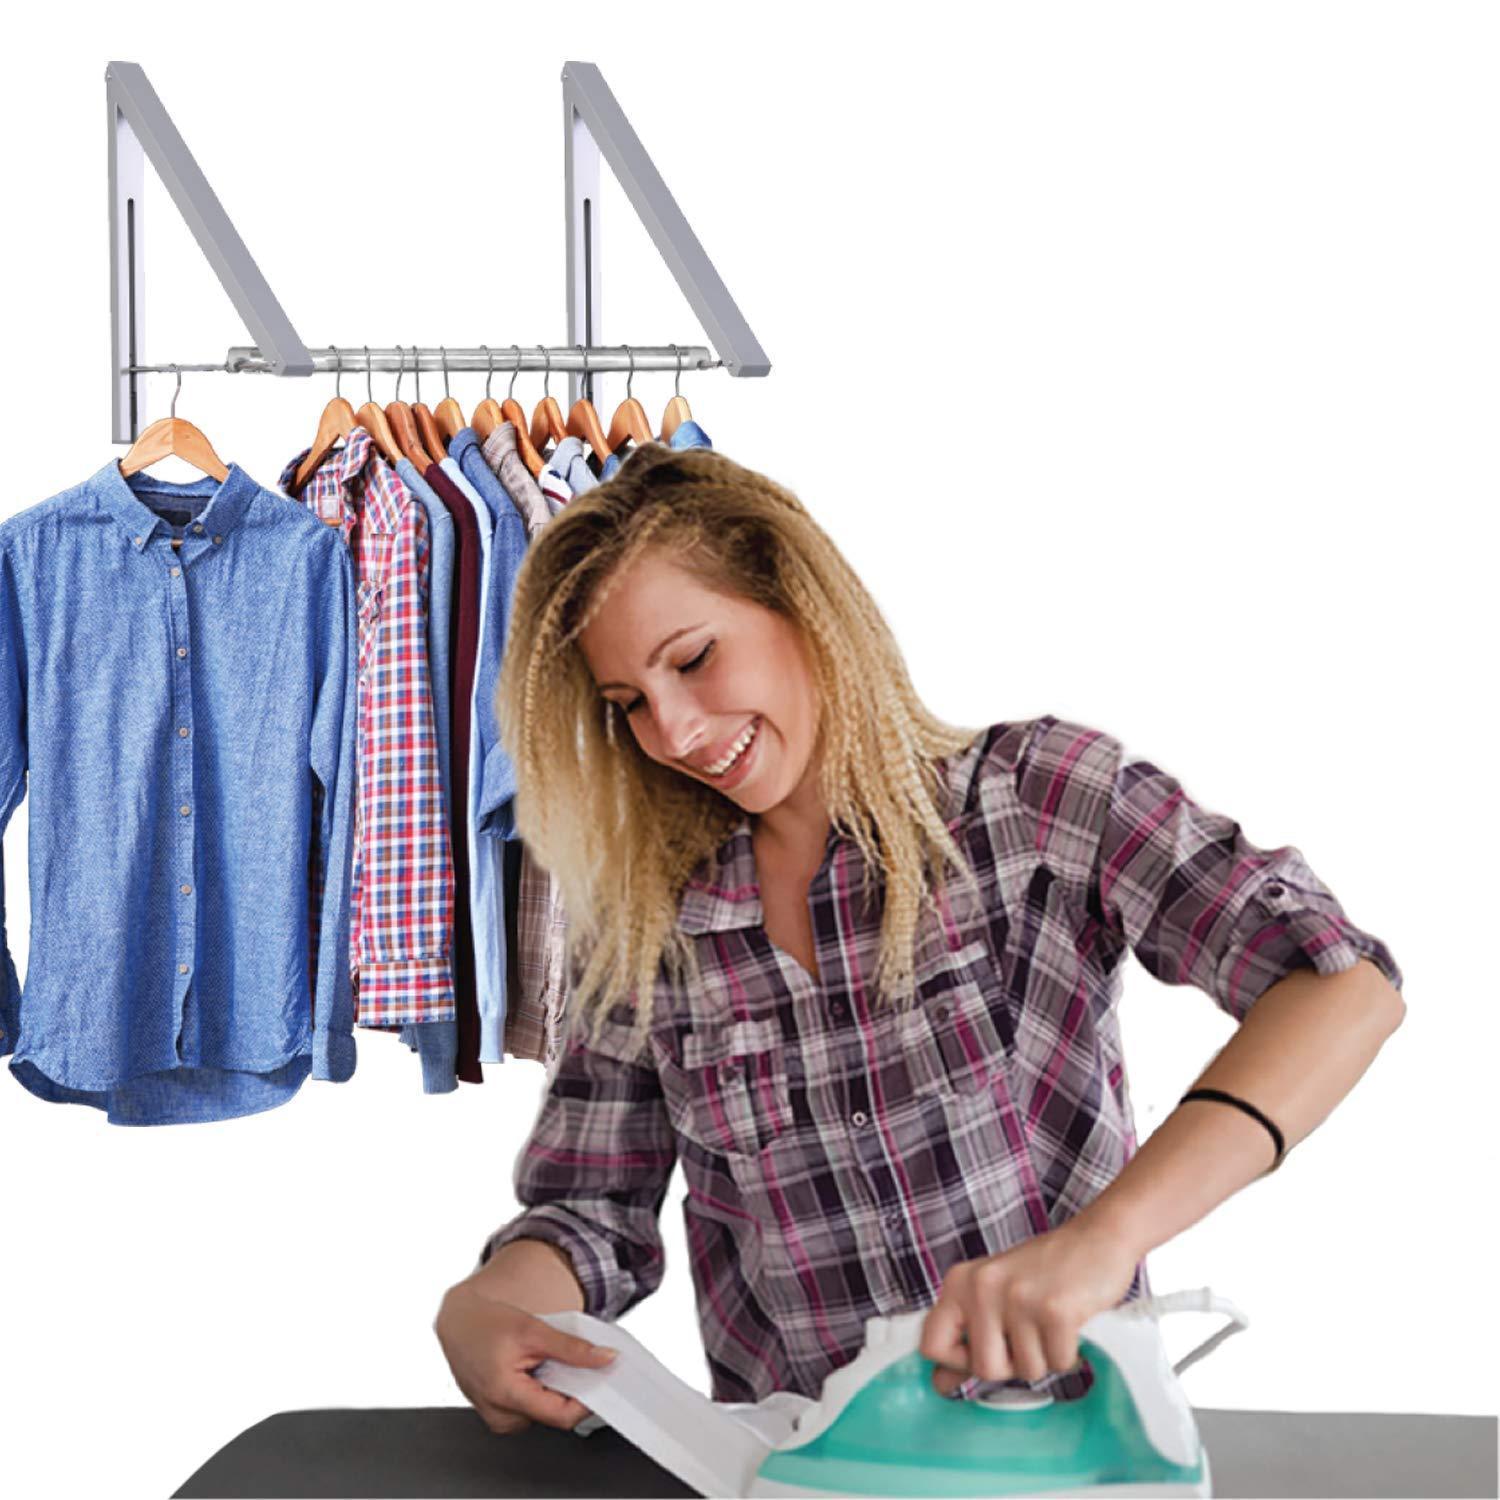 Amazon best stock your home retractable closet rod and clothes rack wall mounted folding clothes hanger drying rack for laundry room closet storage organization aluminum easy installation silver